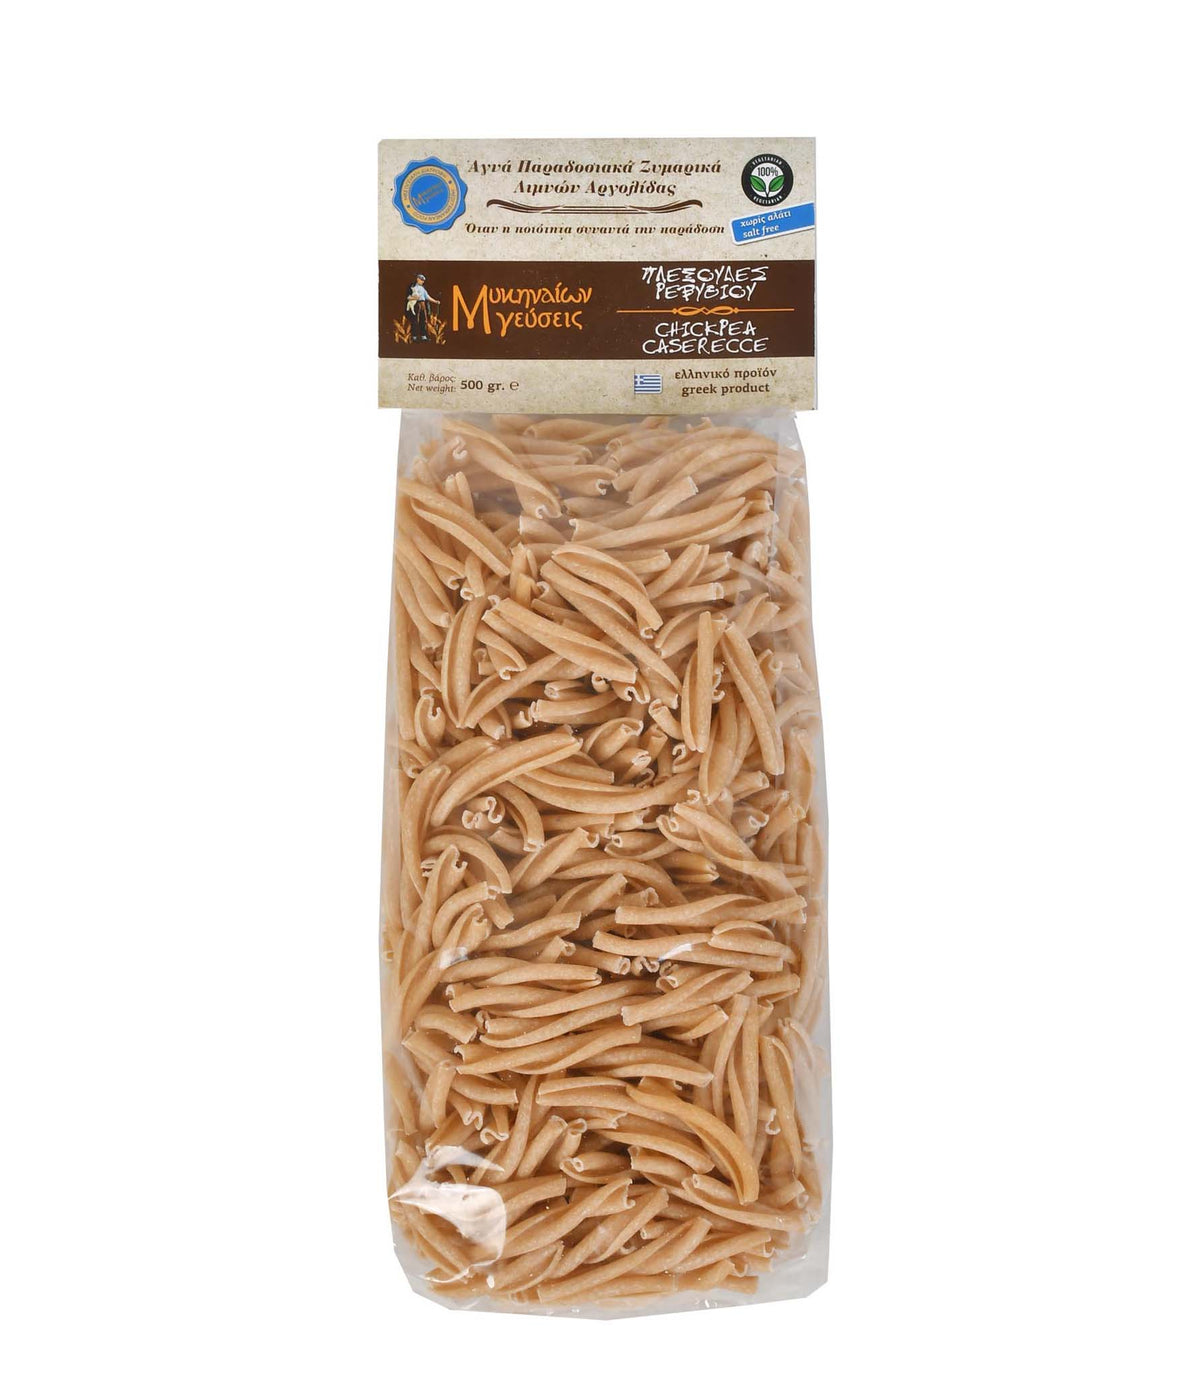 Front of package of Mikinaion Gefsis Caserecce with Chickpea and Onion pasta